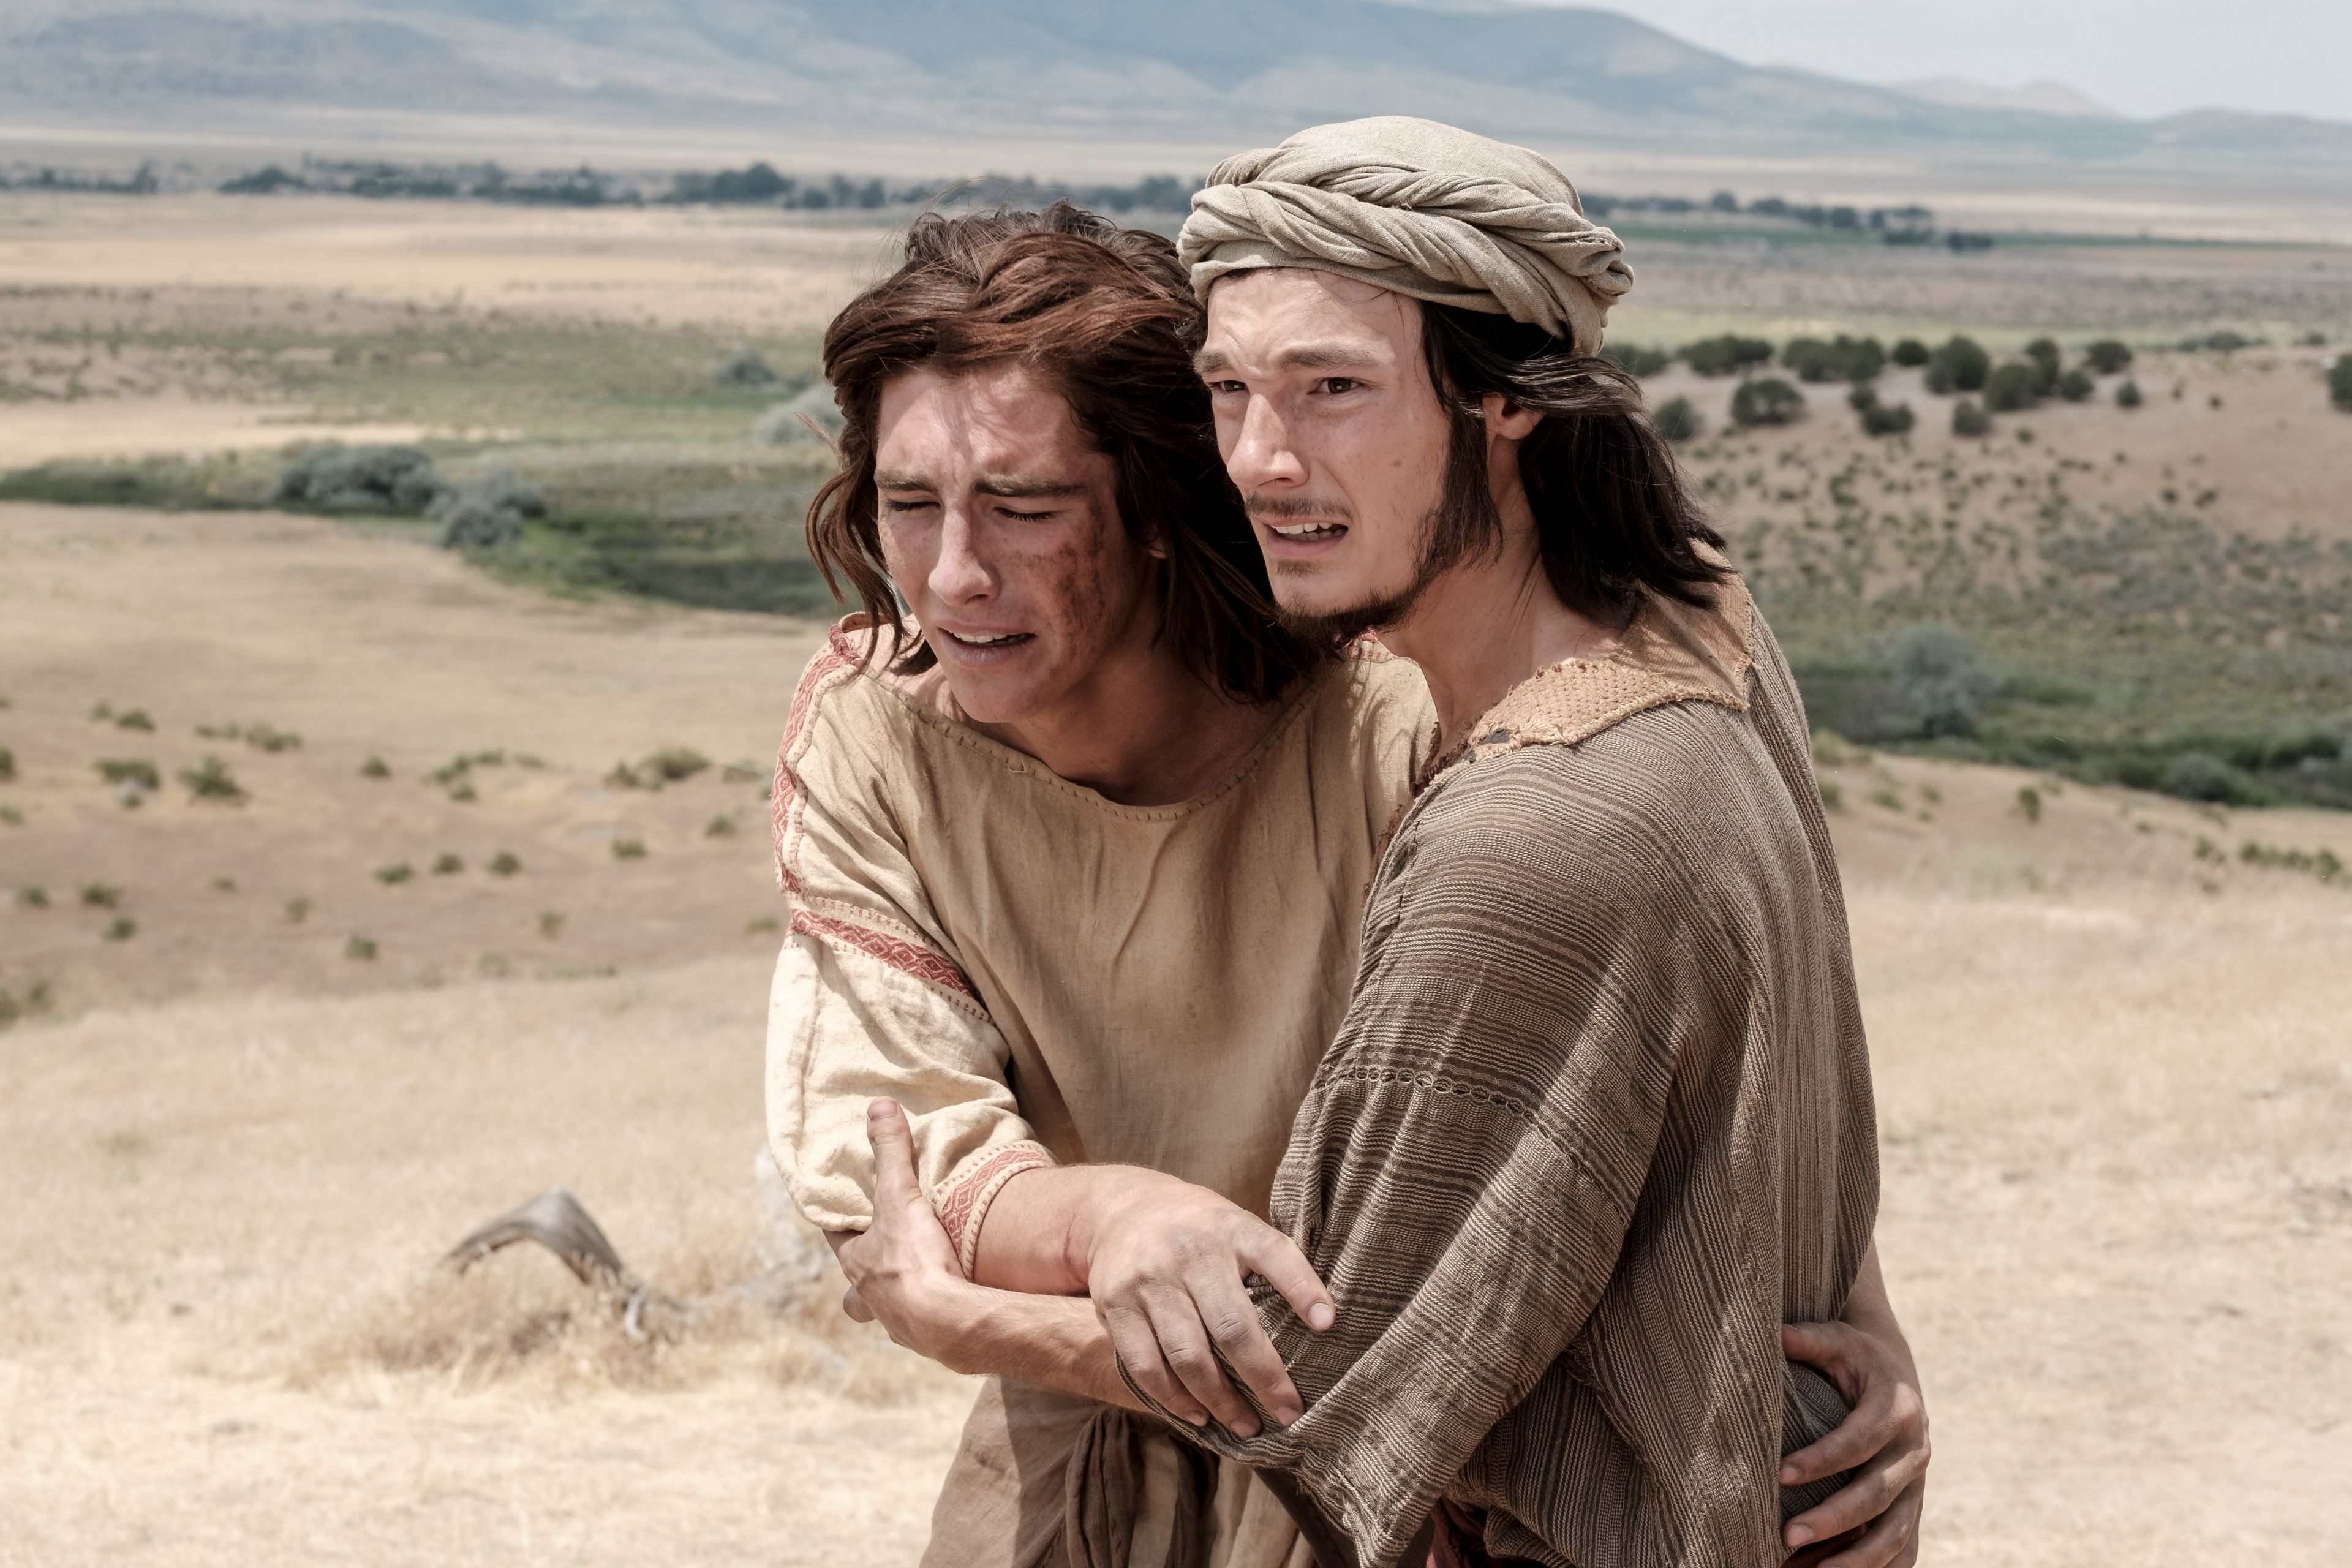 Sam comforts Nephi after Nephi was tied up by Laman and Lemuel.